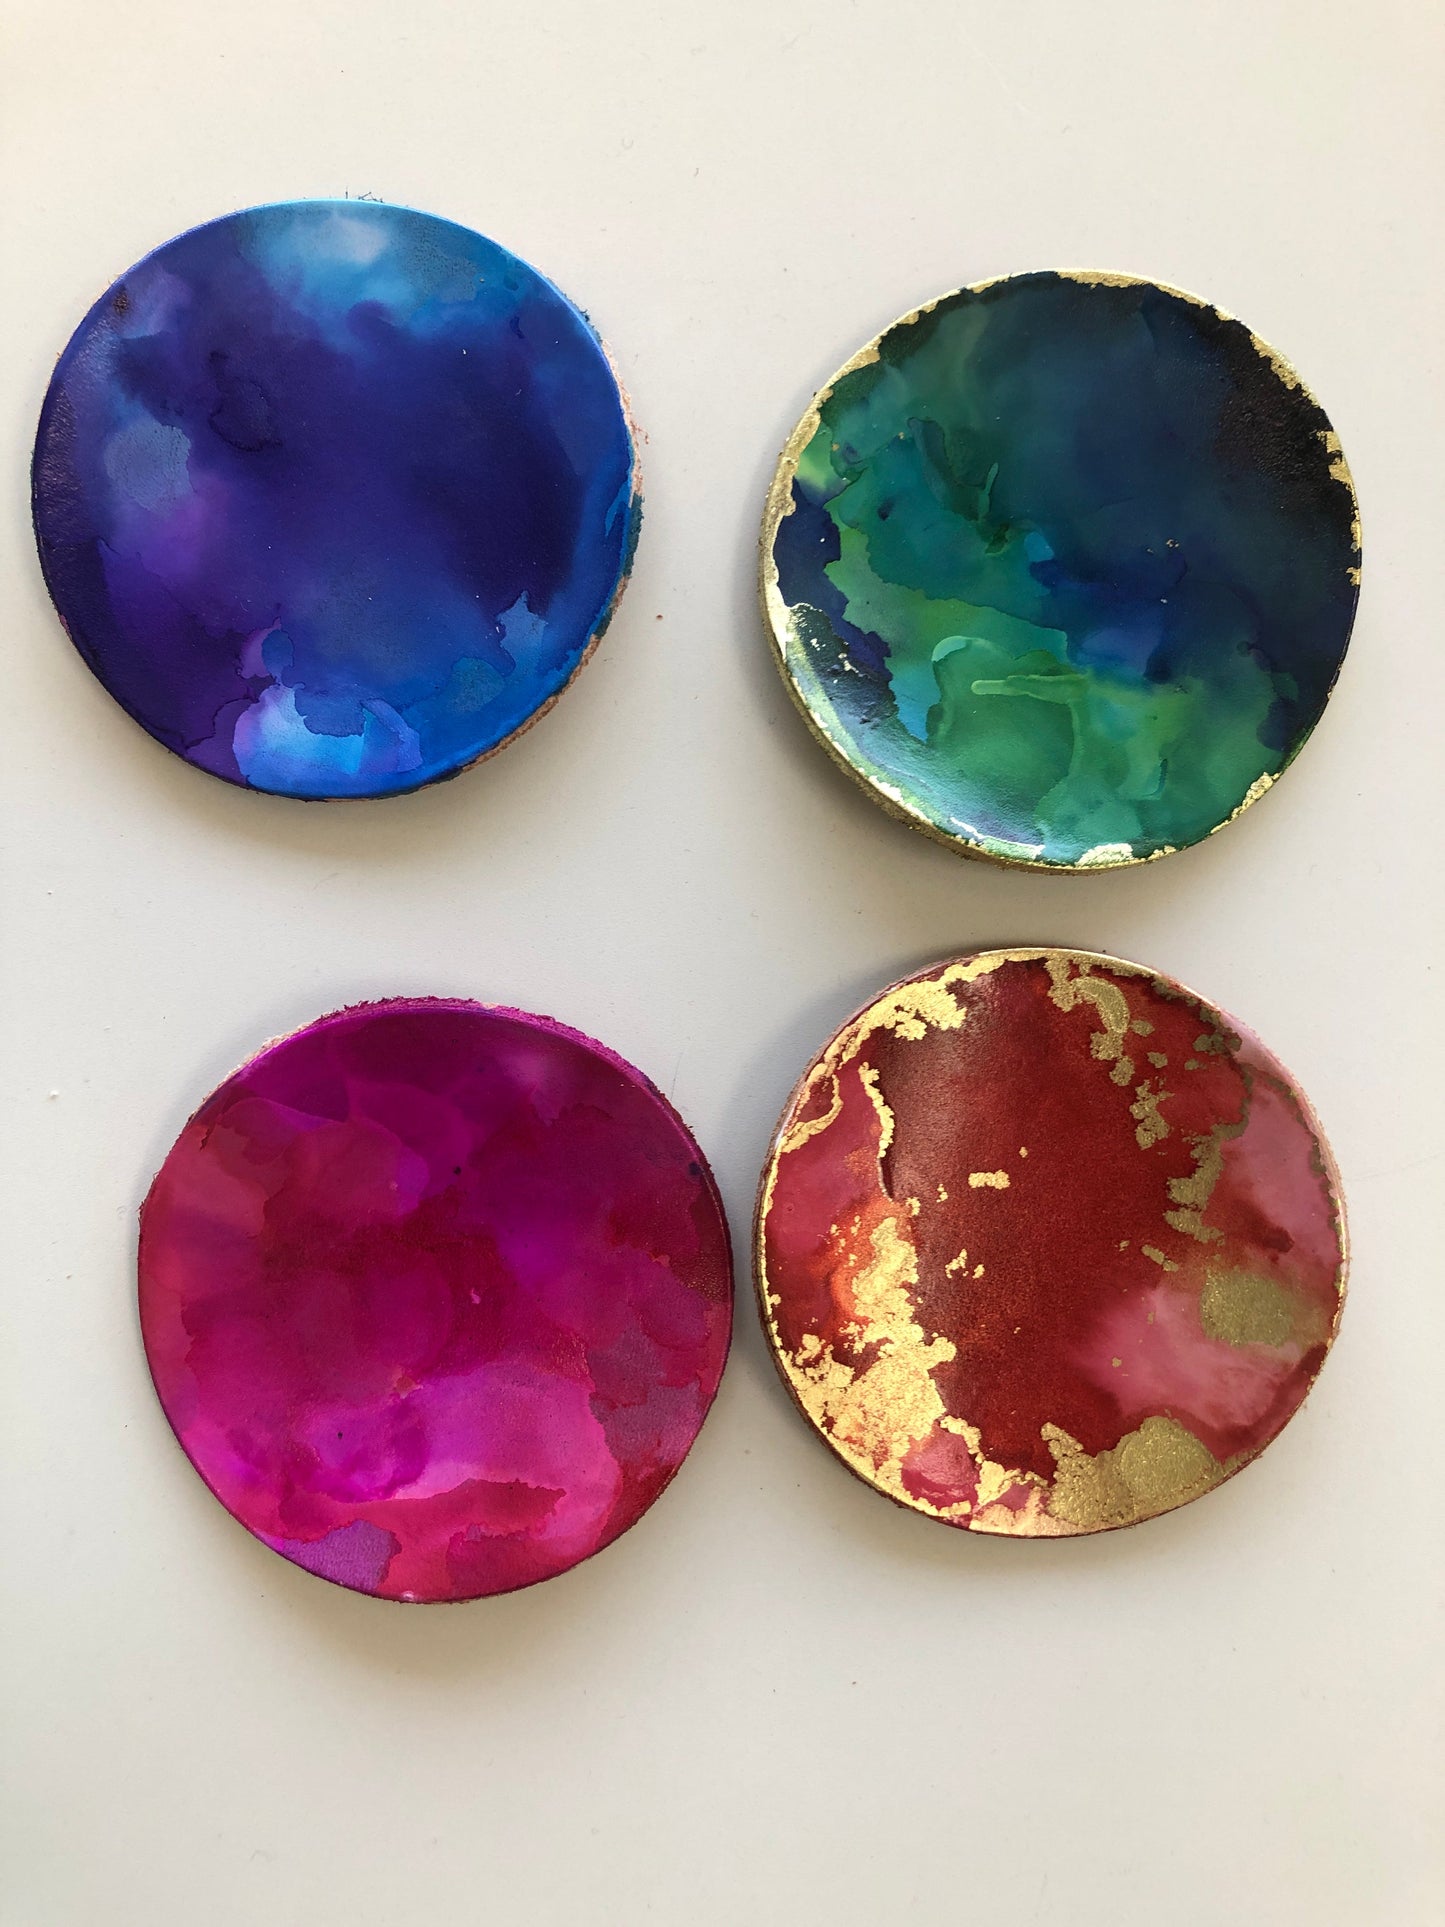 Abstract Inked Coasters (Alcohol Inks)